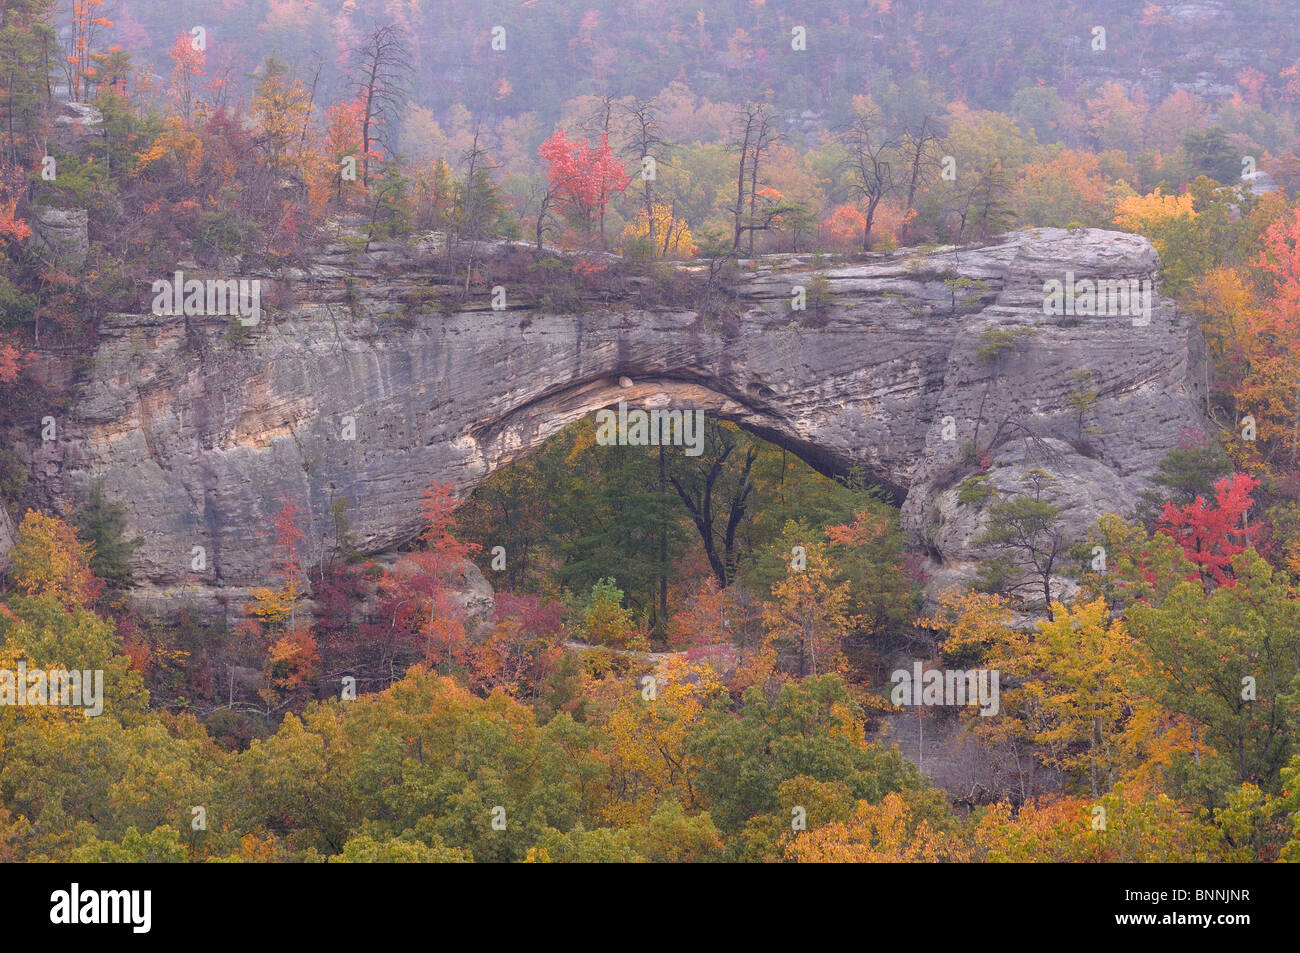 Natural Arch Daniel Boone National Forest Whitley City Kentucky USA America United States of America autumn fall forest Stock Photo